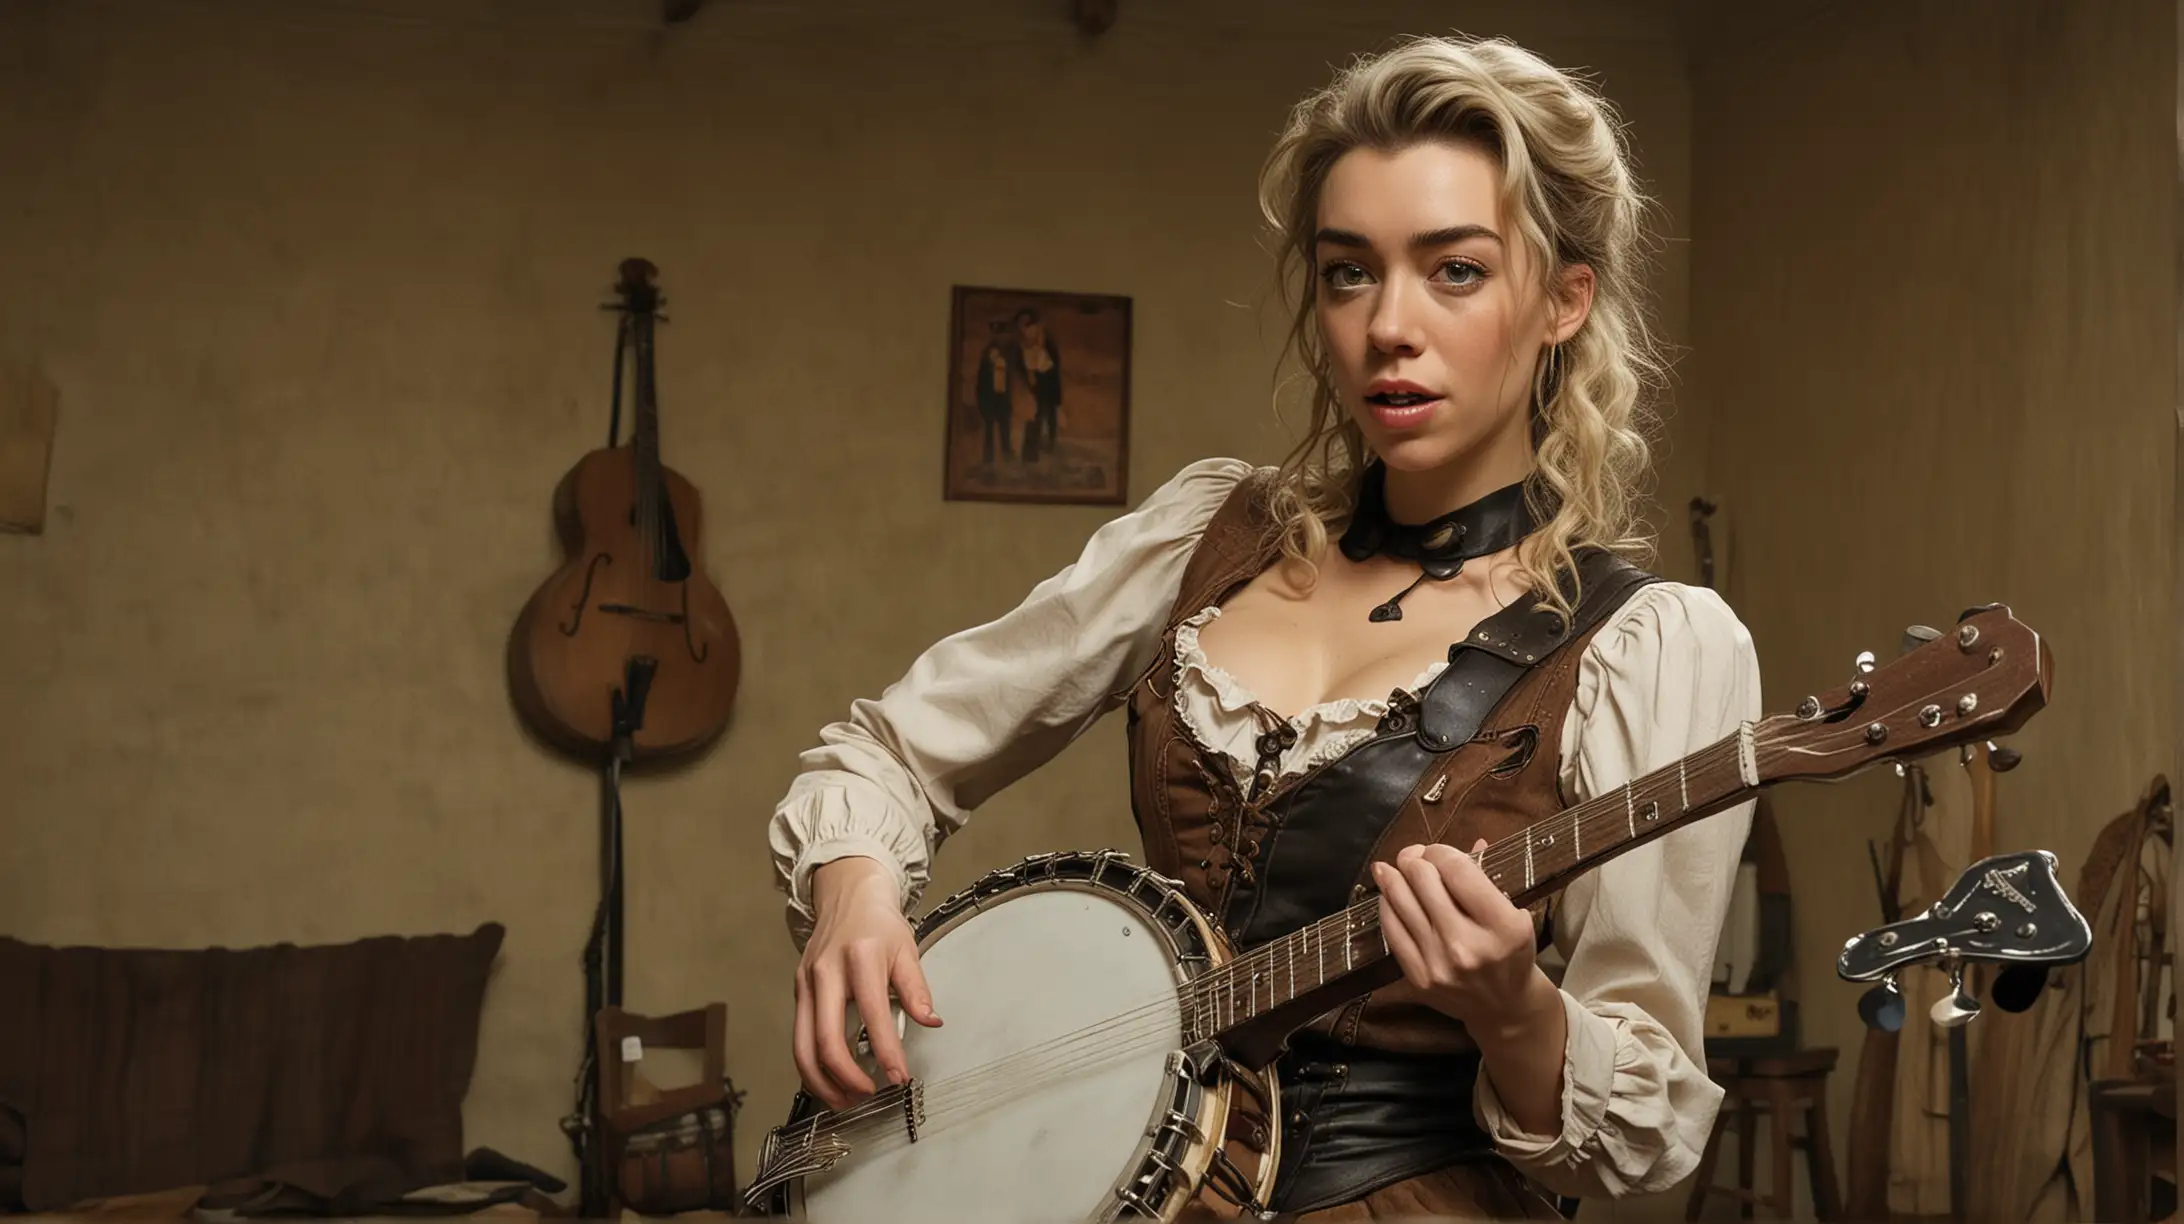 Seductive Vanessa Kirby Playing Banjo in Western Fallout Style